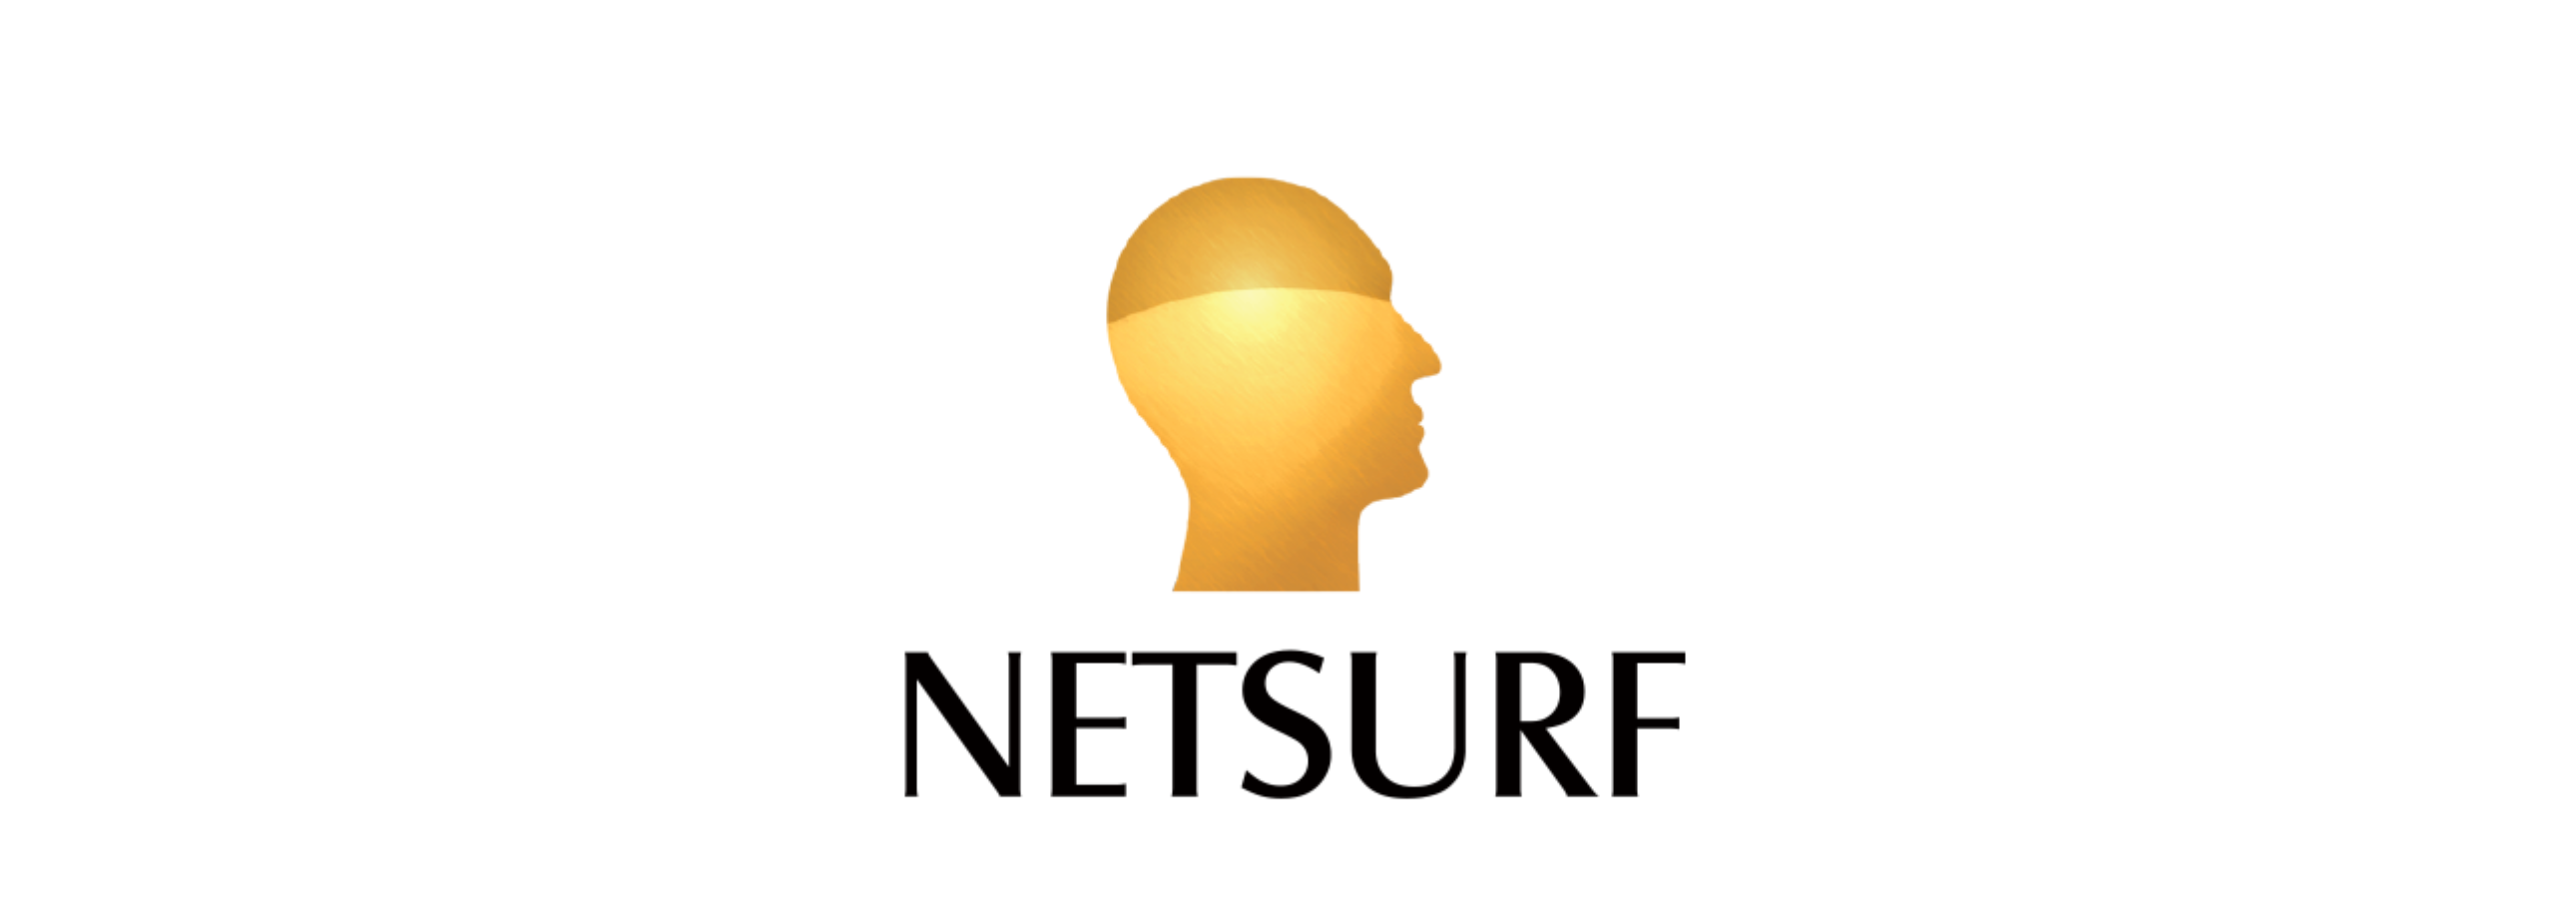 Netsurf Communication ends FY22 with a profit of Rs 19 crore; plans to  expand business on its newly launched app - Brand Wagon News | The  Financial Express